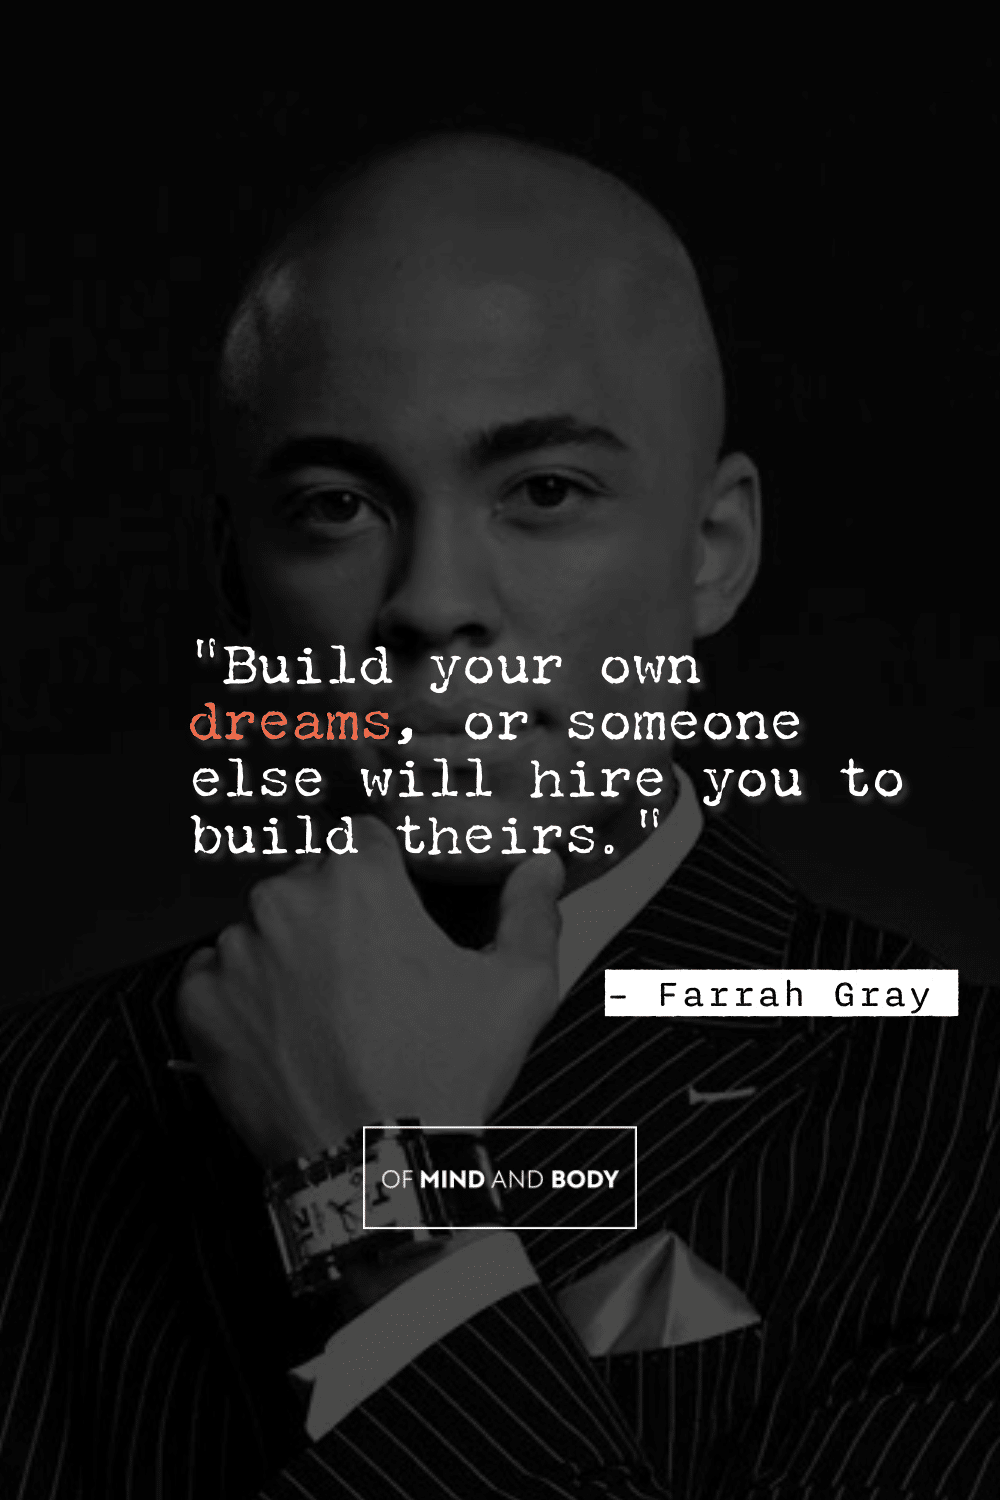 Quotes on Self Improvement - "Build your own dreams, or someone else will hire you to build theirs."